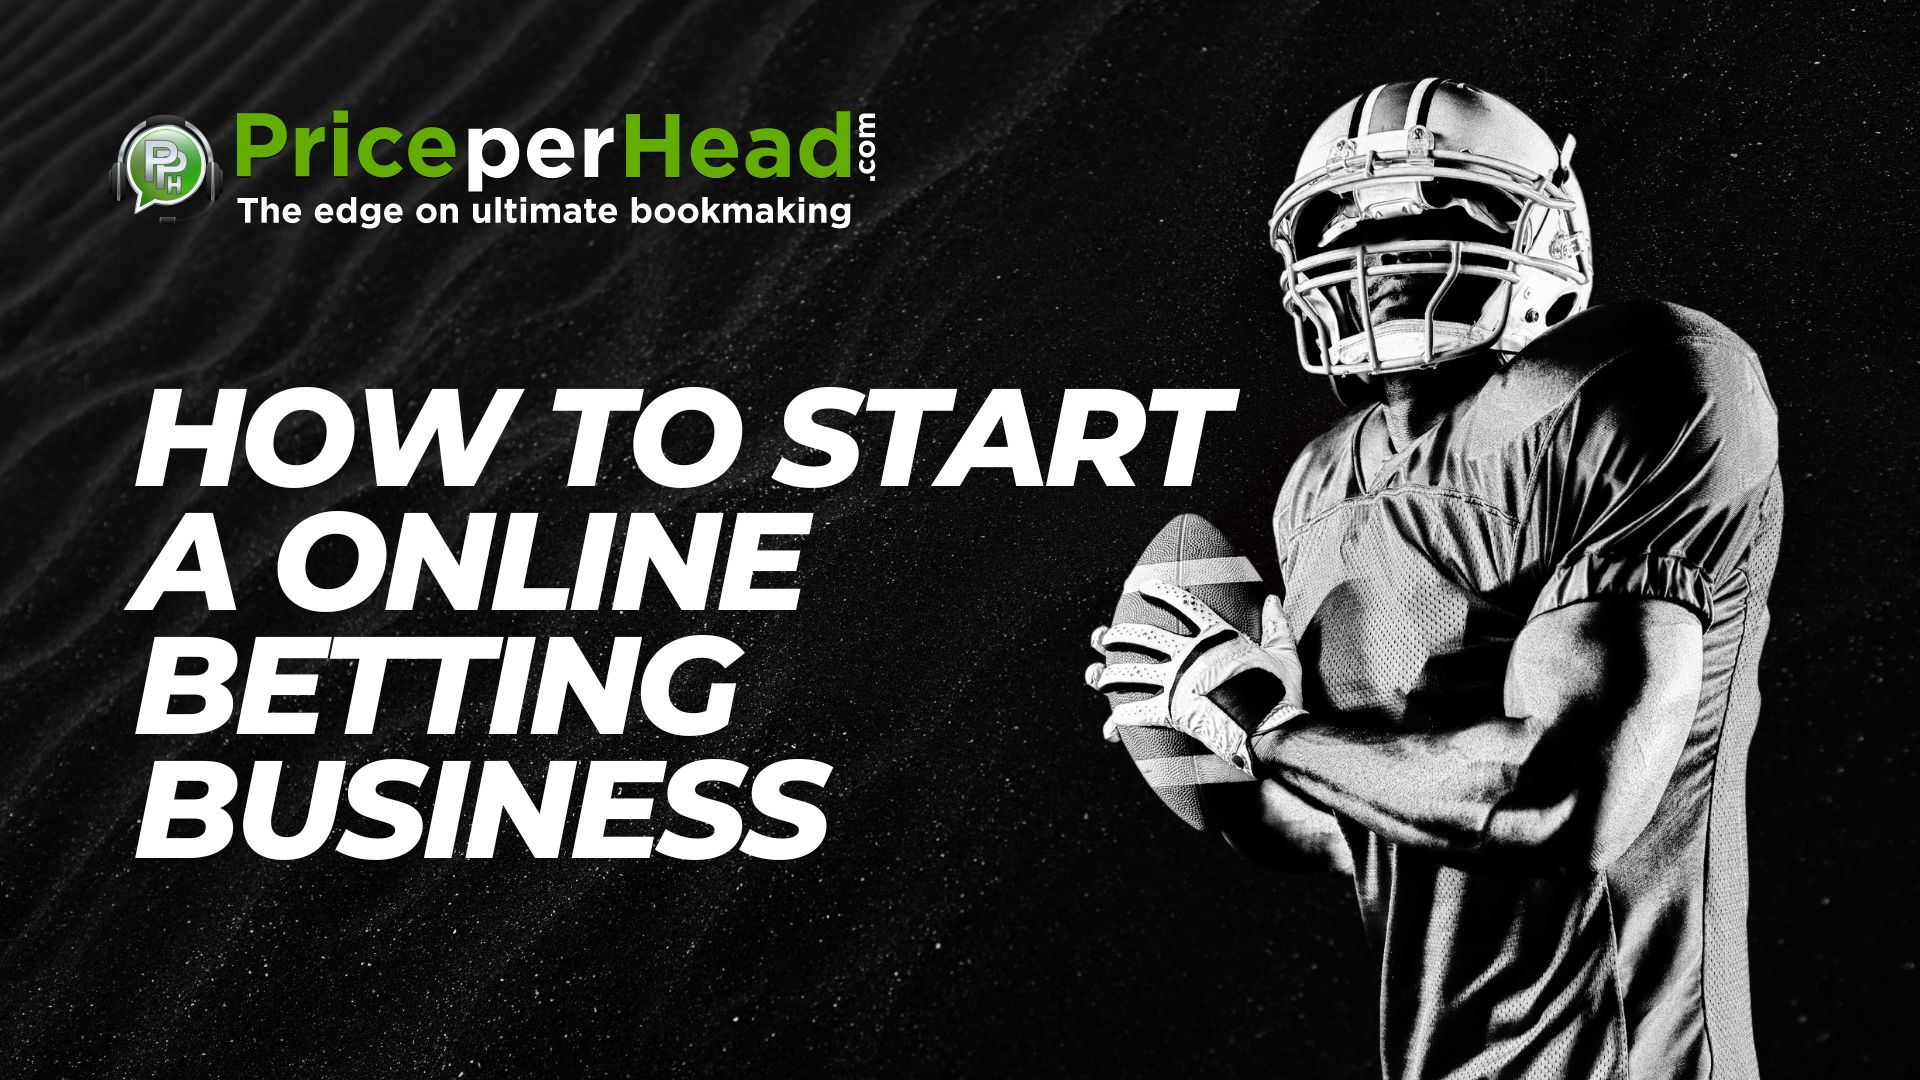 how to start a online betting business, pay per head, price per head